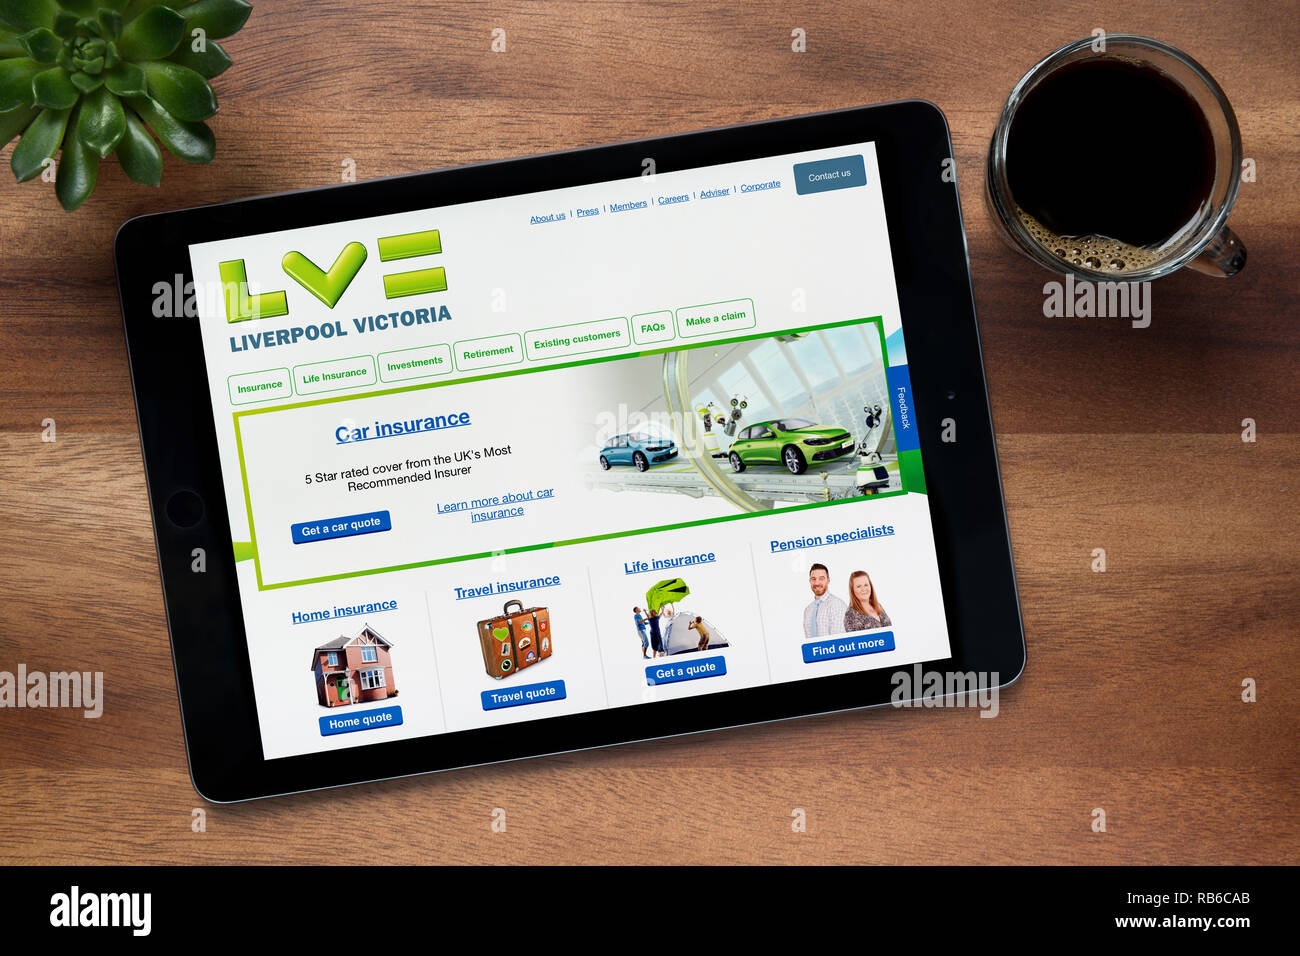 The website of Liverpool Victoria is seen on an iPad tablet, on a wooden table along with an espresso coffee and a house plant (Editorial use only). Stock Photo